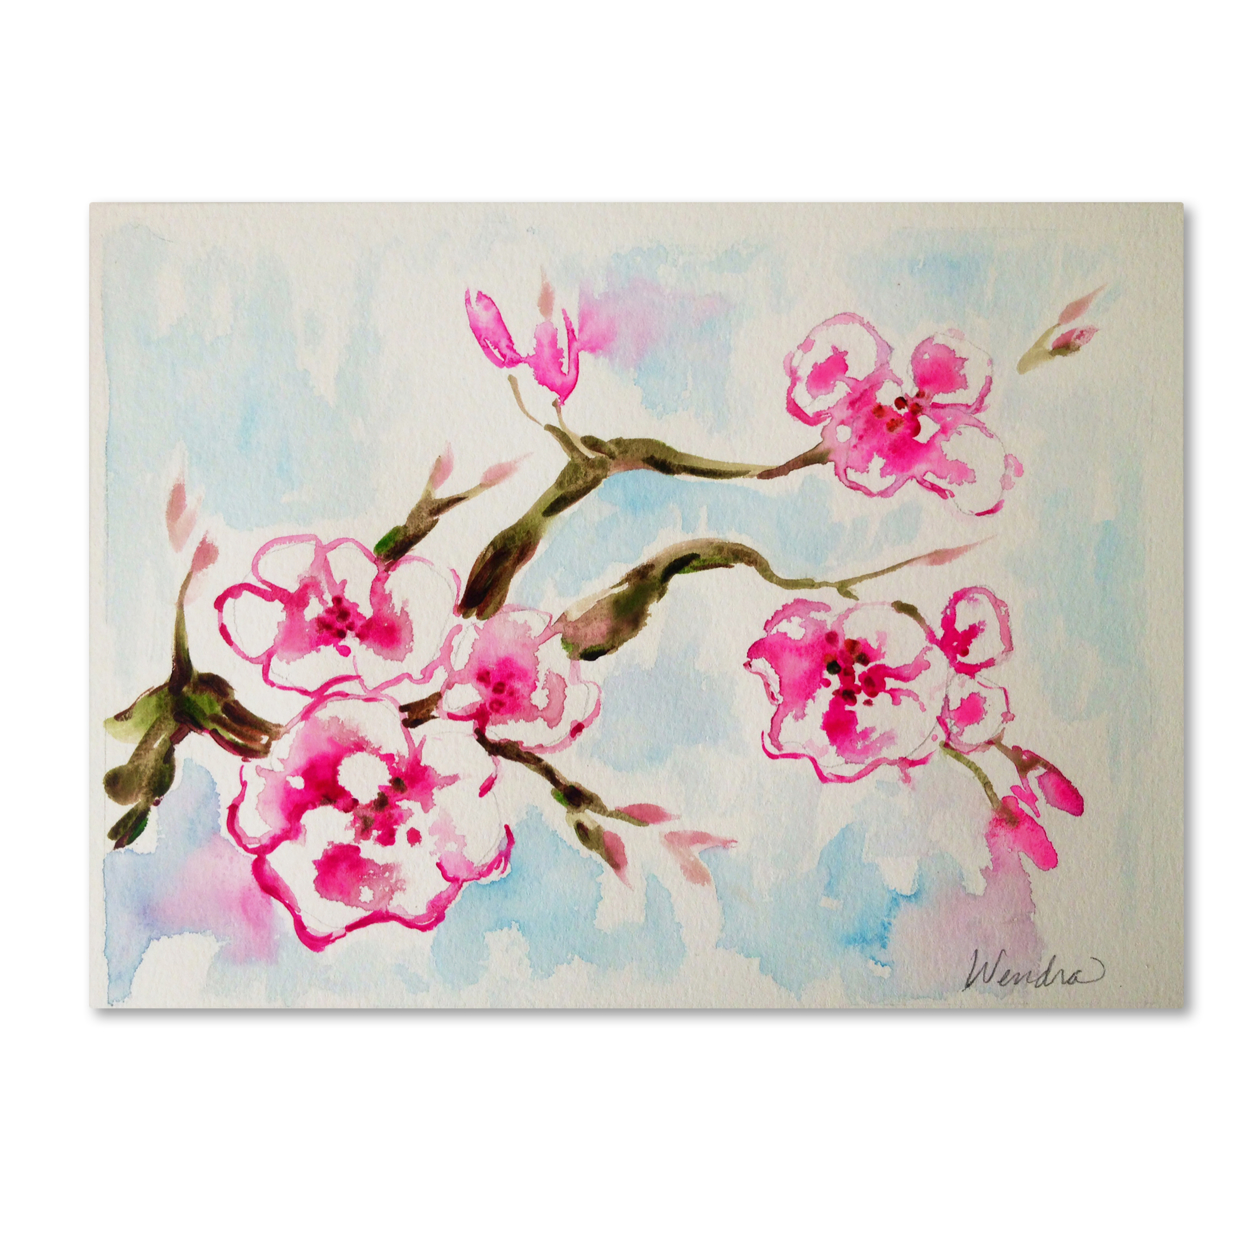 Wendra 'Cherry Blossom' Canvas Wall Art 35 X 47 Inches